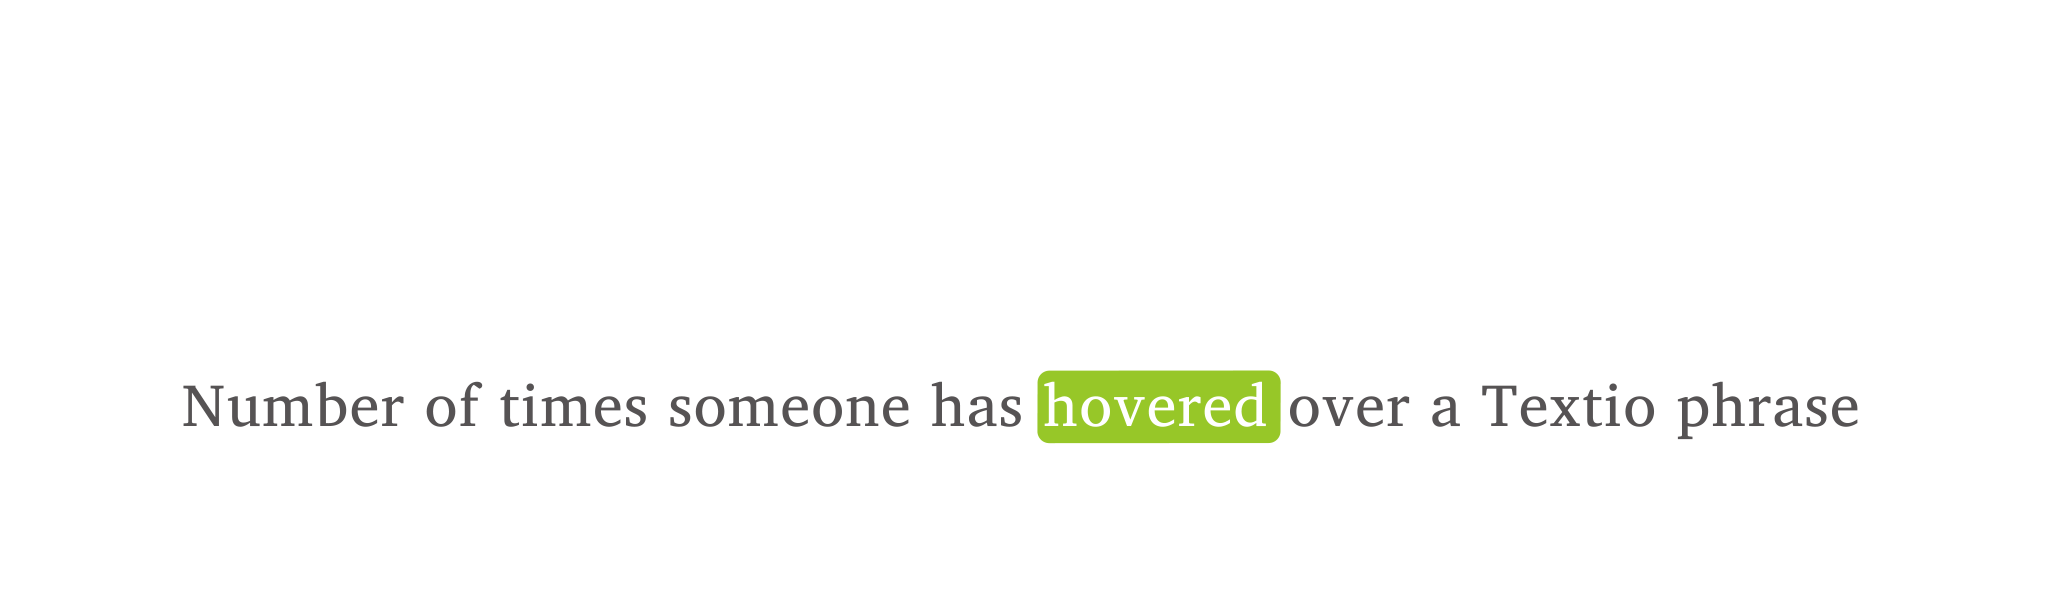 An animation showing 17,981,983 the number of times someone has hovered over a Textio phrase